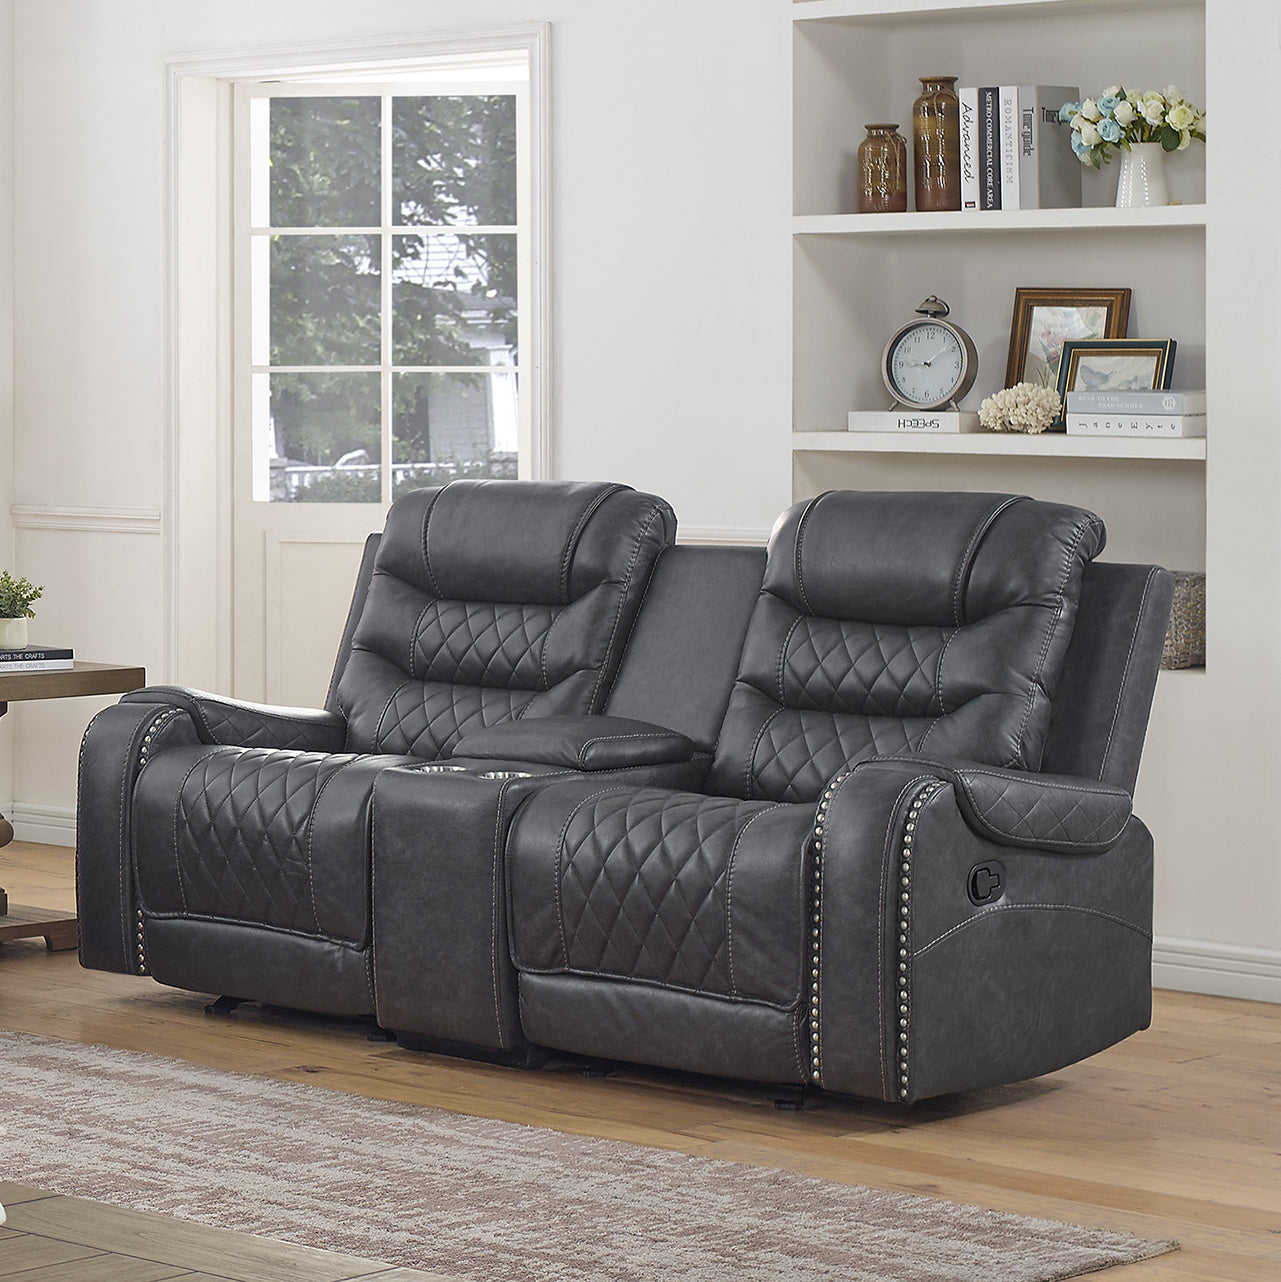 Klens Faux Leather Reclining Loveseat with Nailhead Trim, Gray